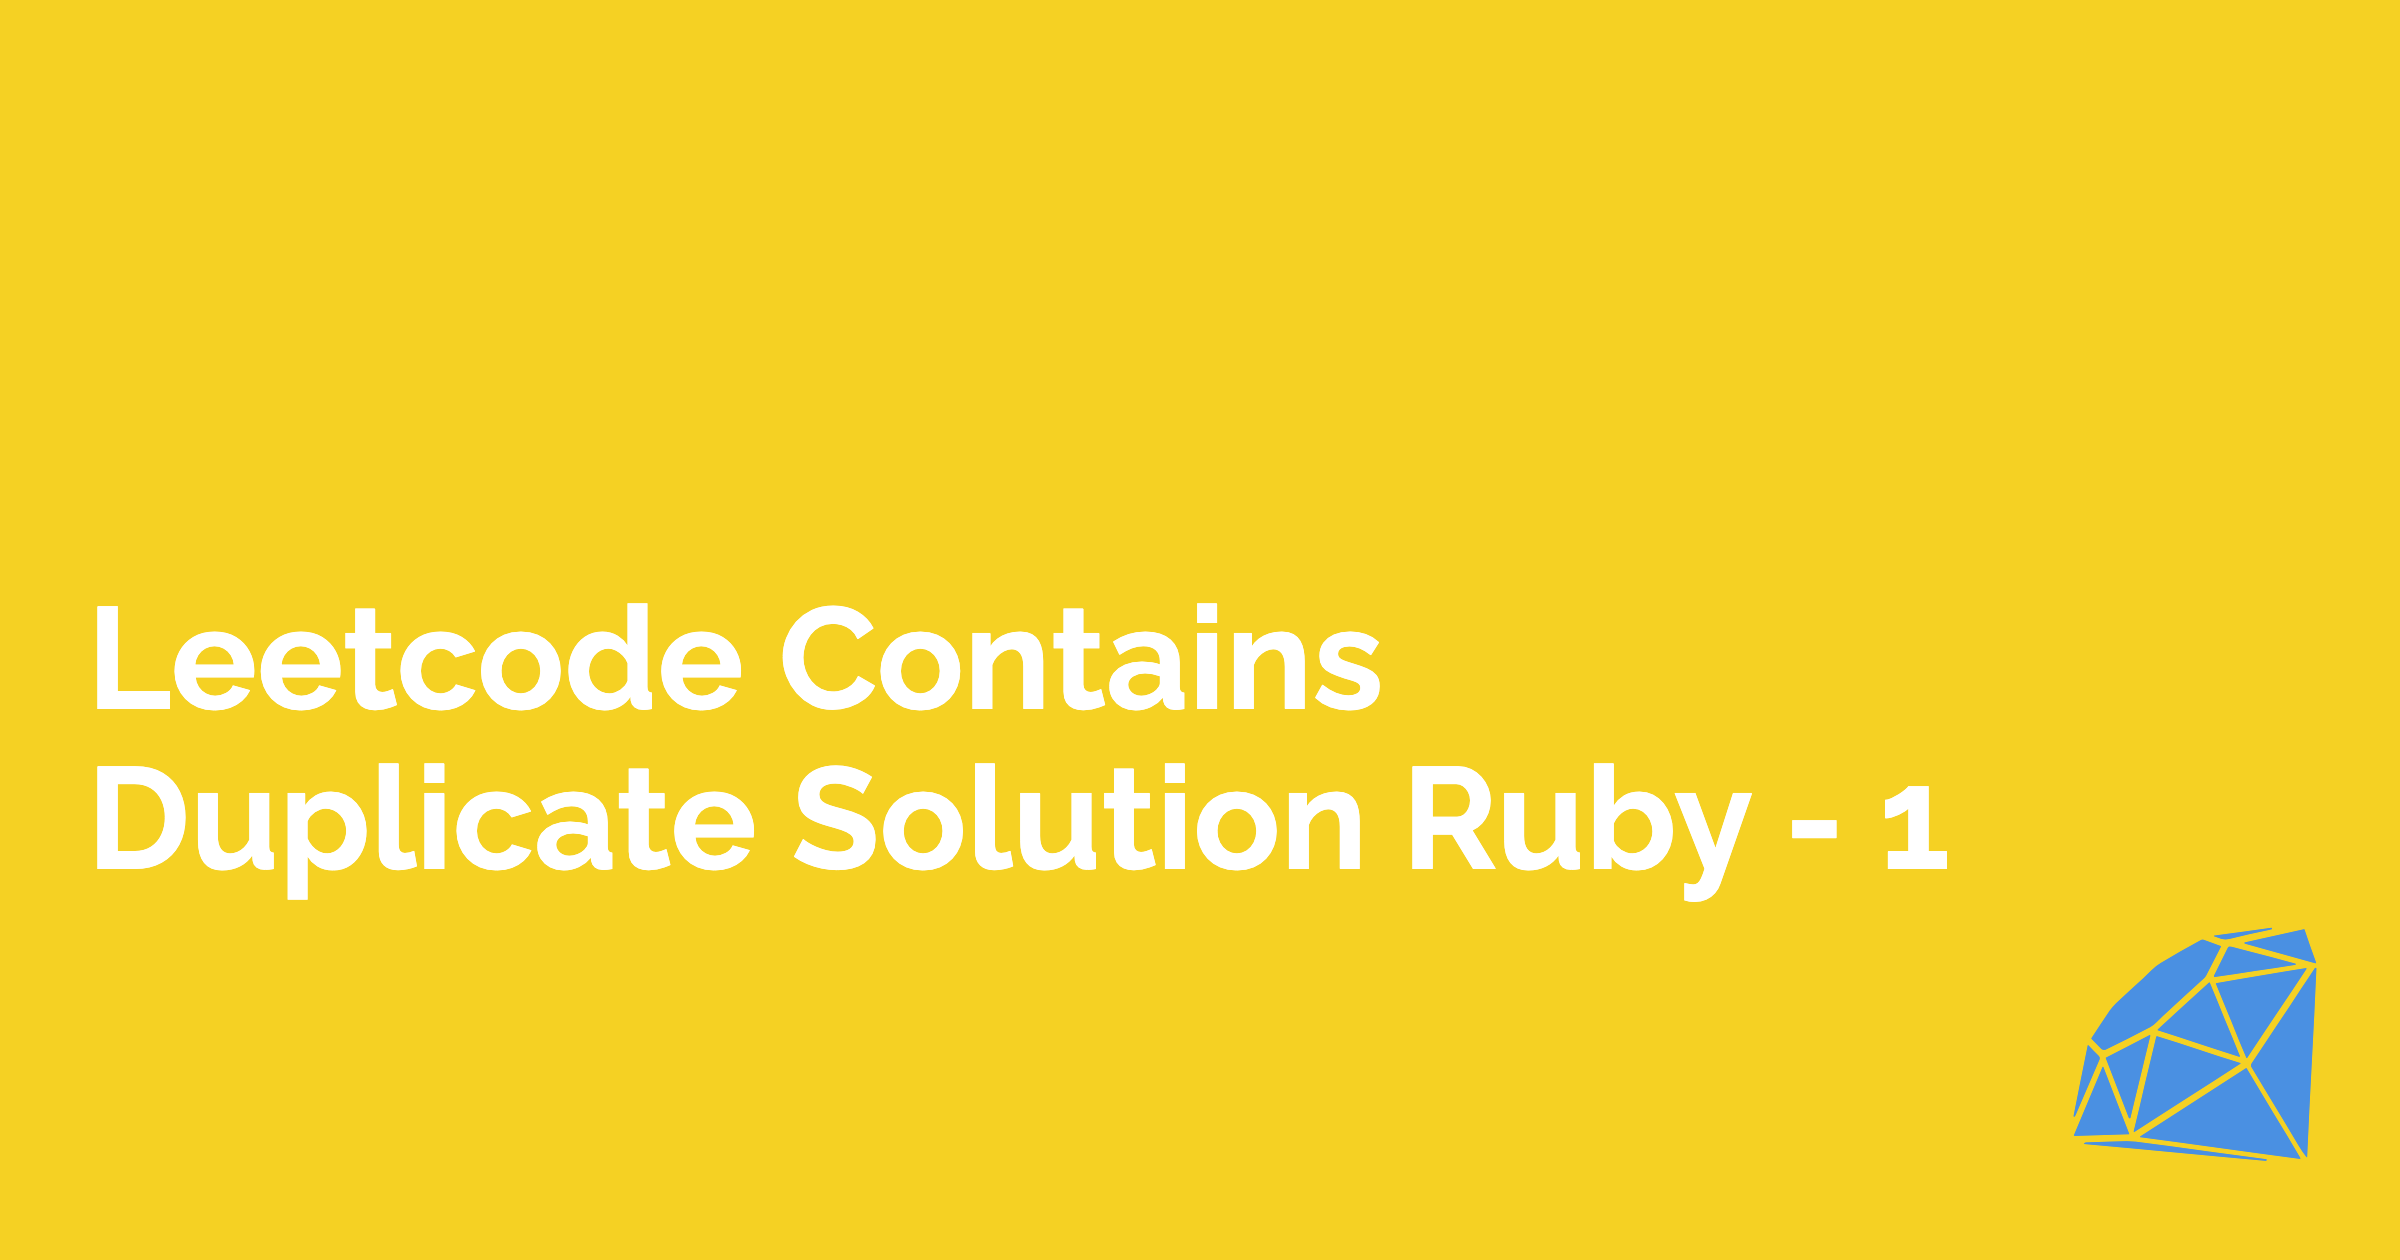 Leetcode Contains Duplicate Solution Ruby - 1